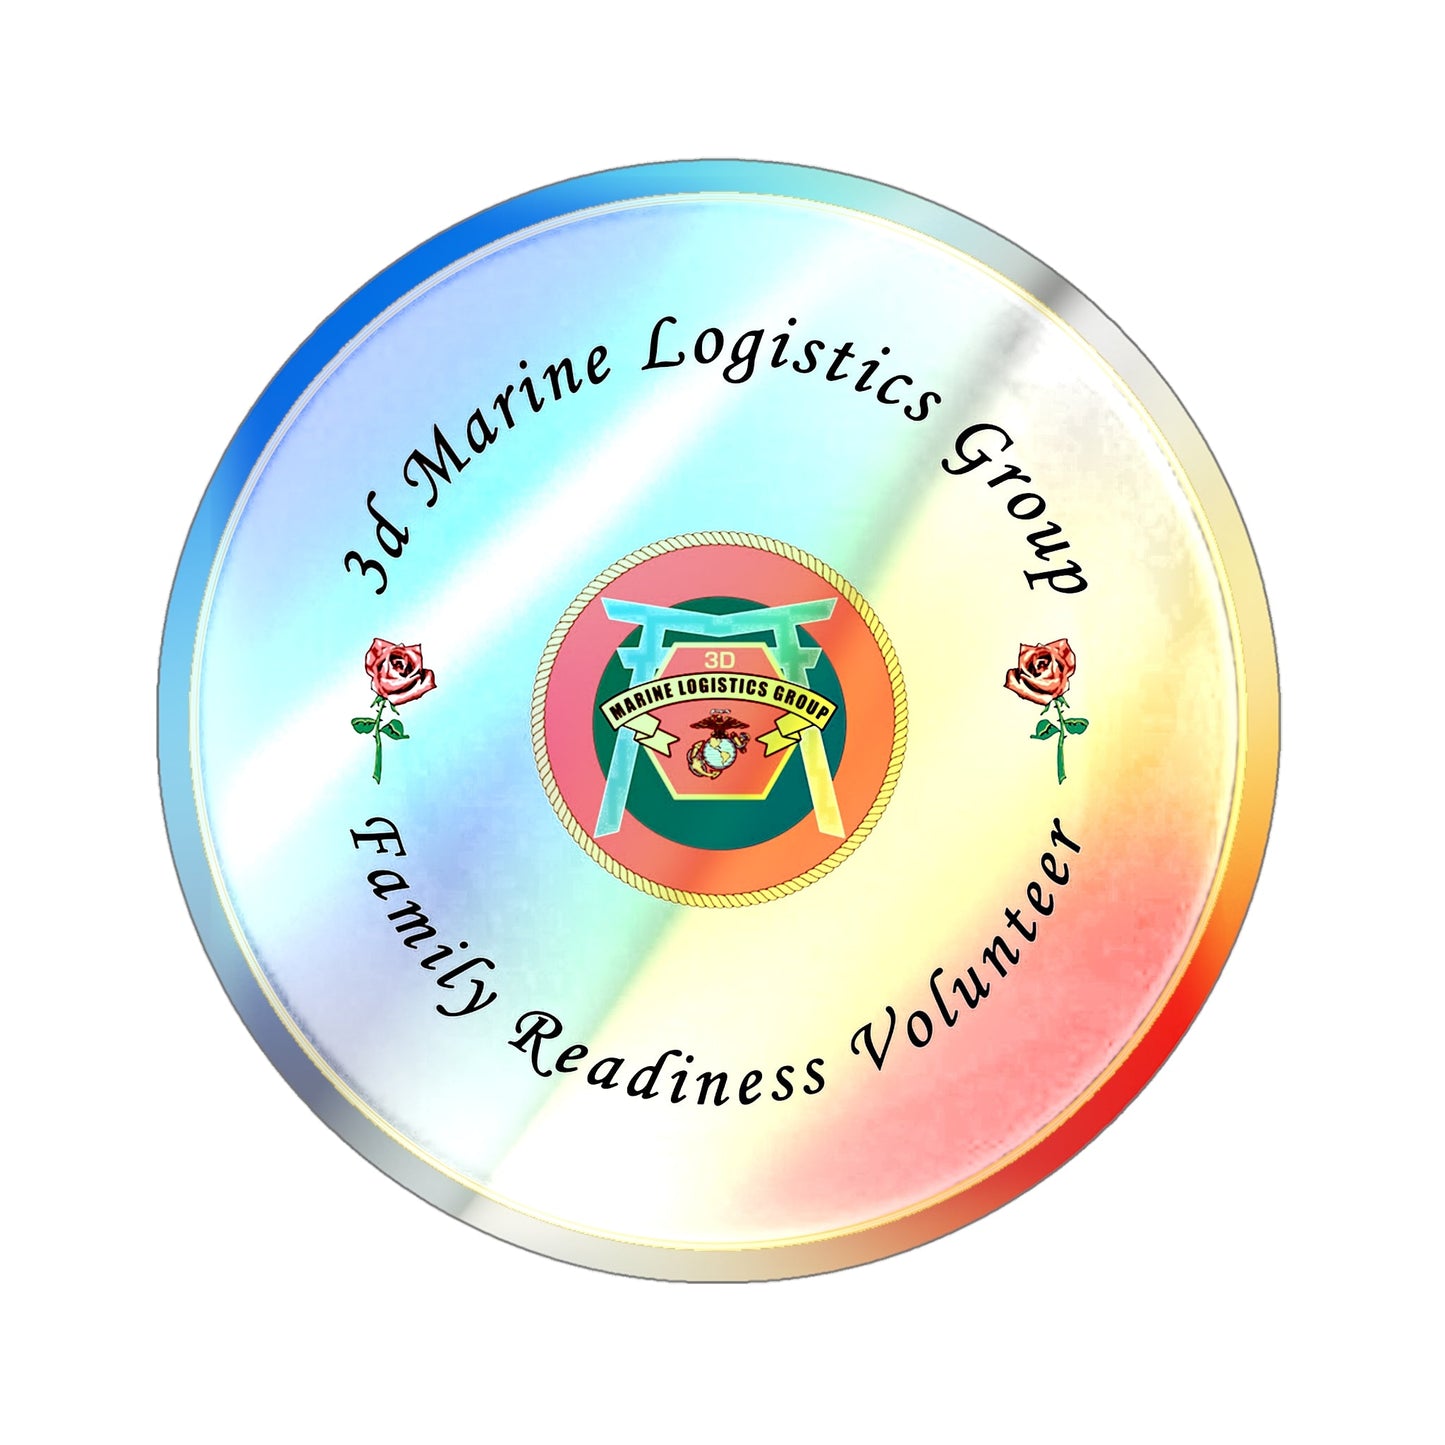 3d Marines Logistics Group Family Readiness Volunteer (USMC) Holographic STICKER Die-Cut Vinyl Decal-5 Inch-The Sticker Space